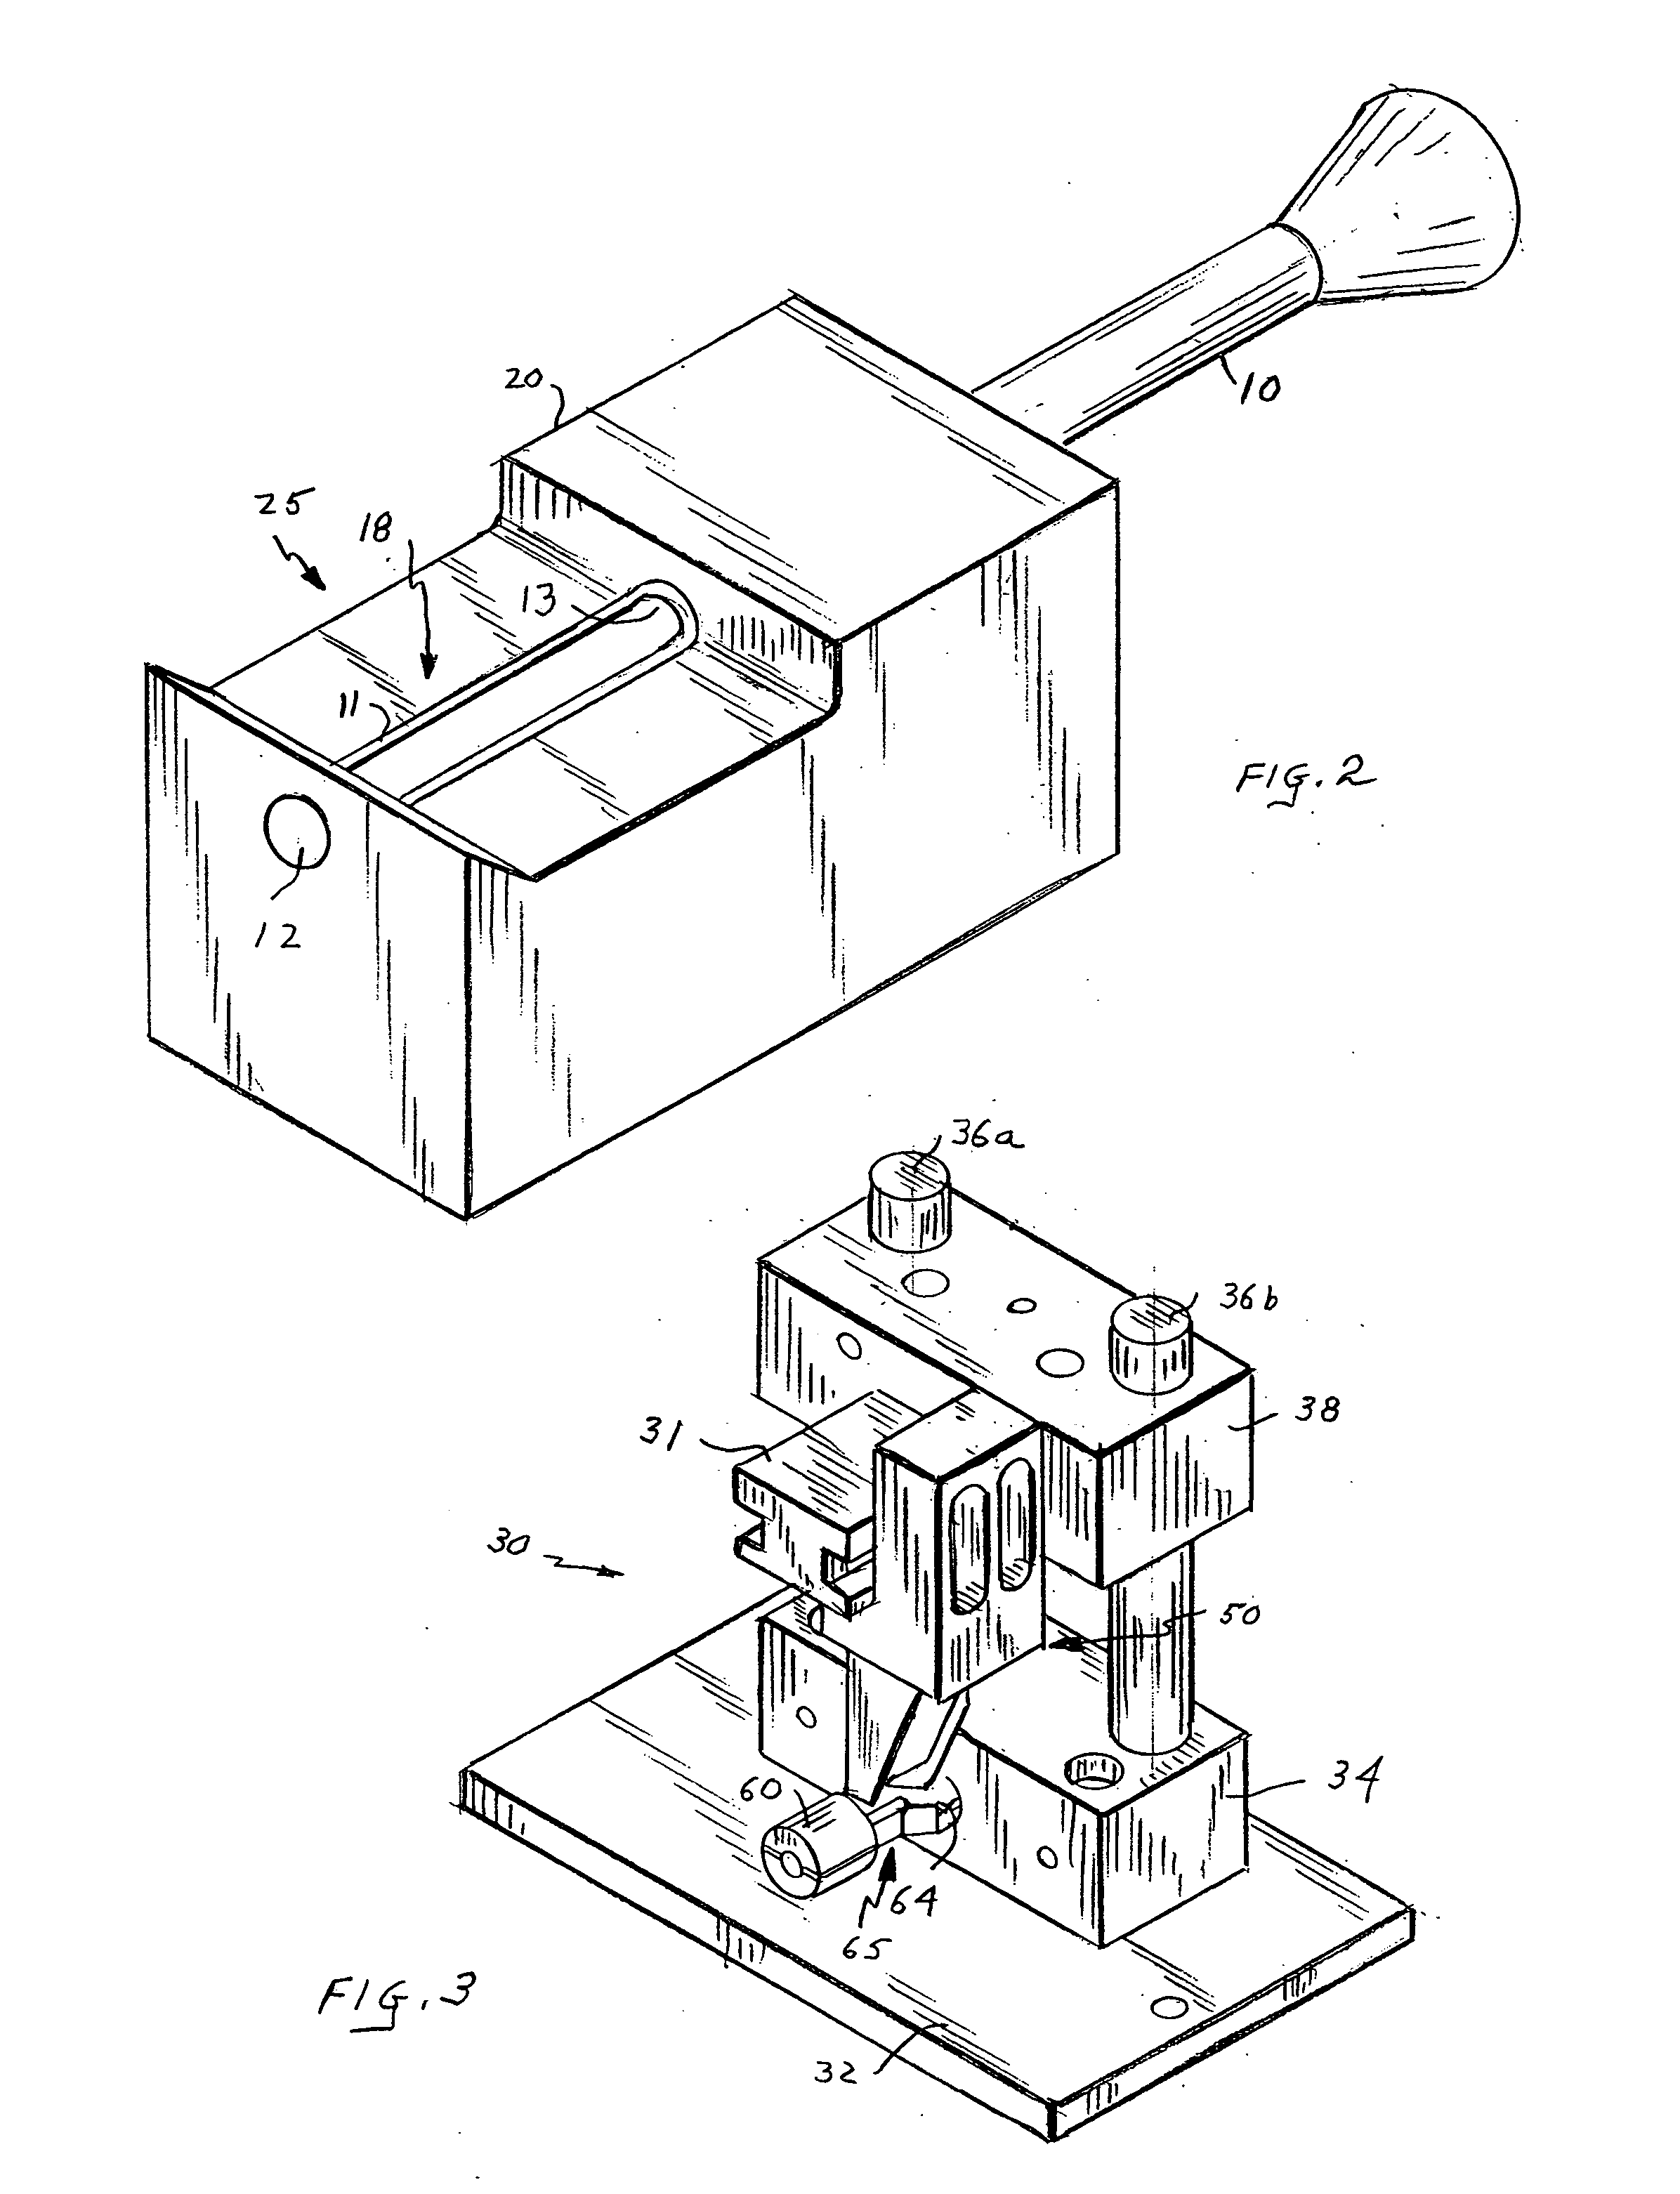 Tooling apparatuses and processes for providing precision shapes in medical catheters